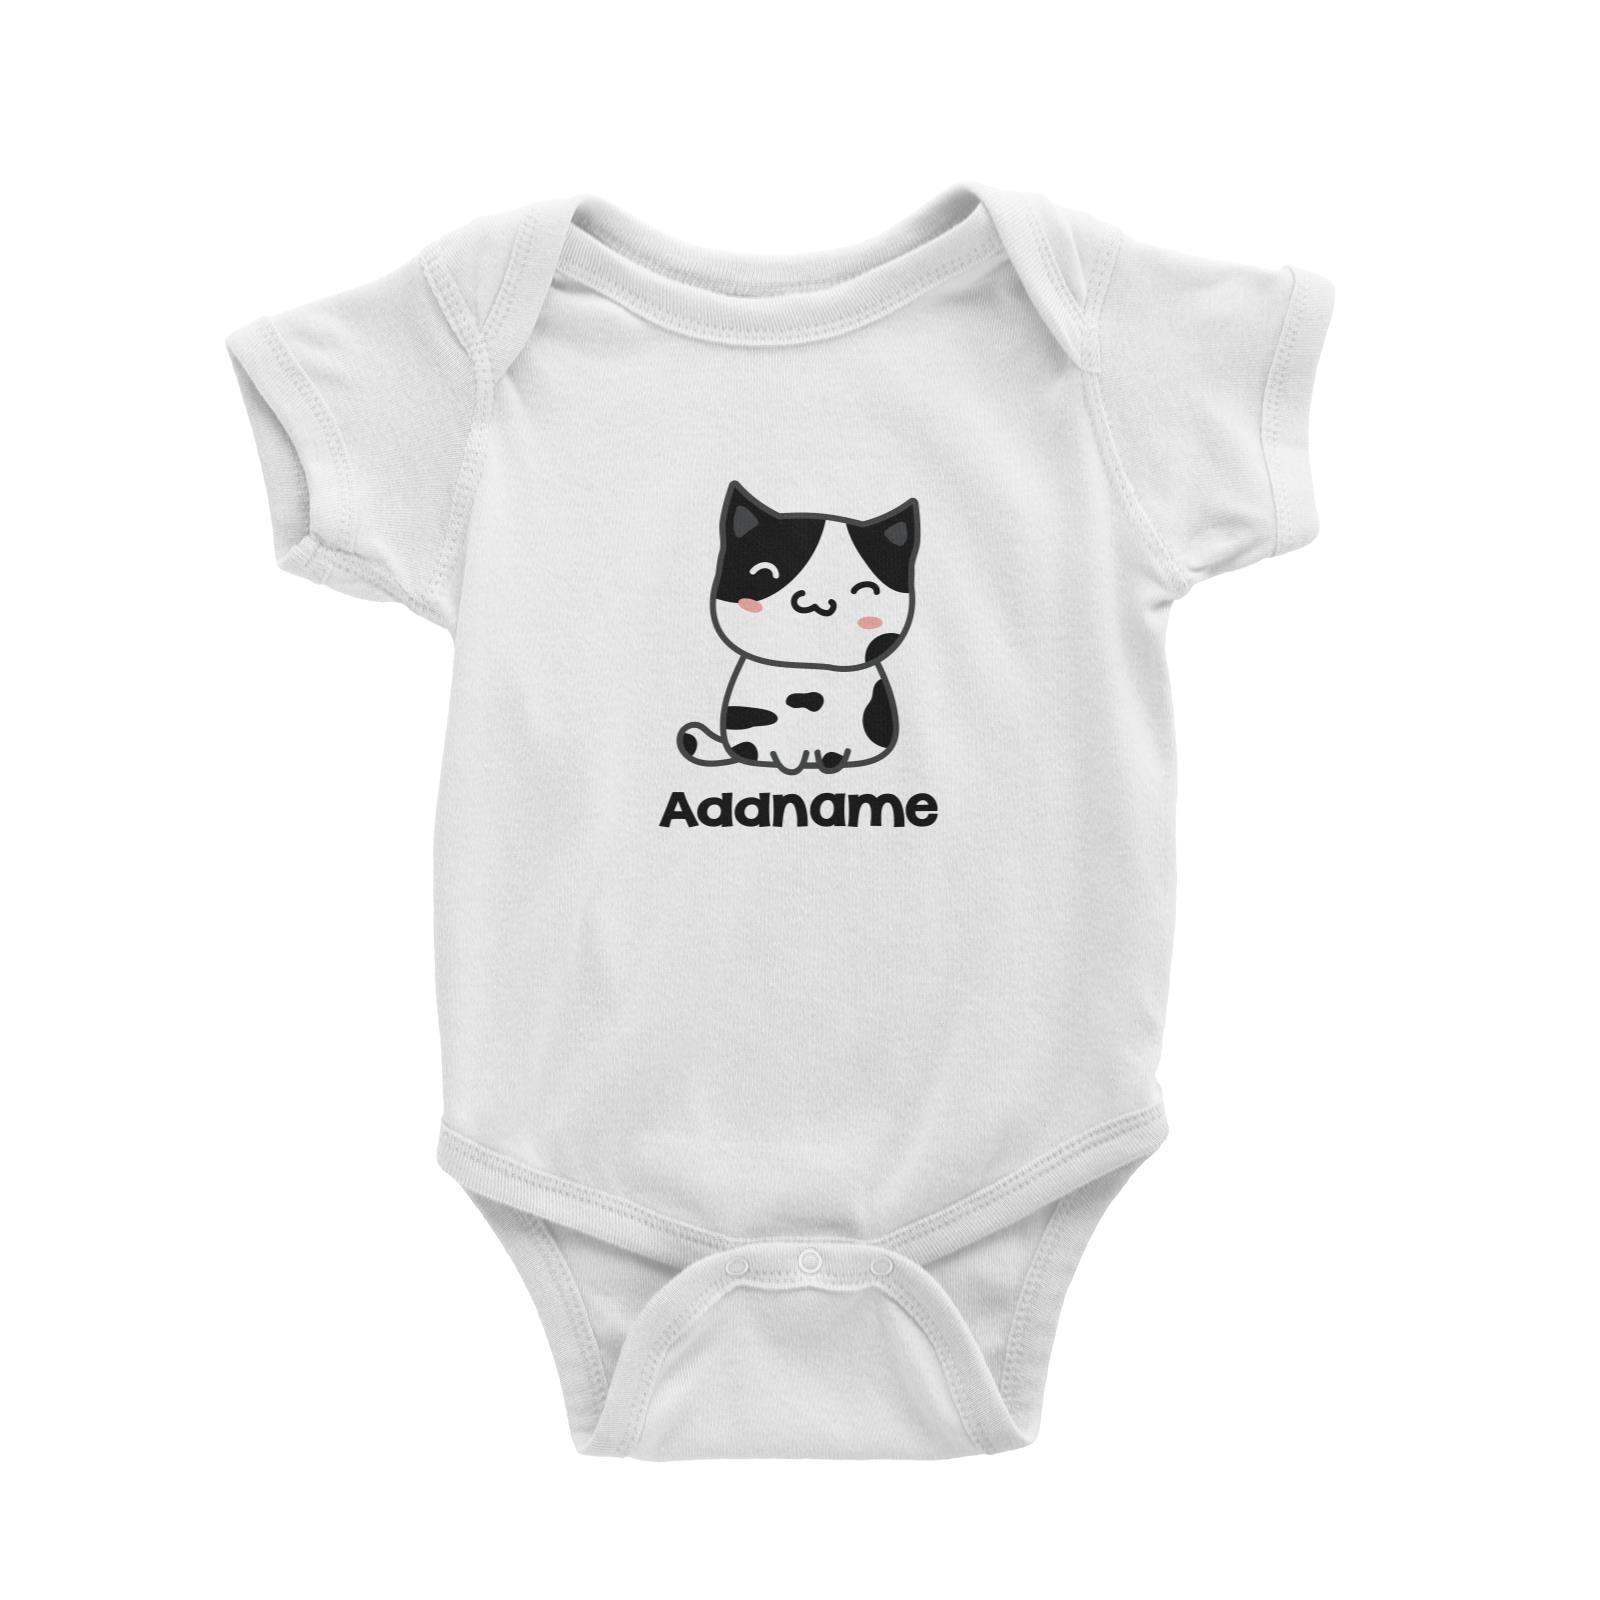 Drawn Adorable Cats Black & White Addname Baby Romper